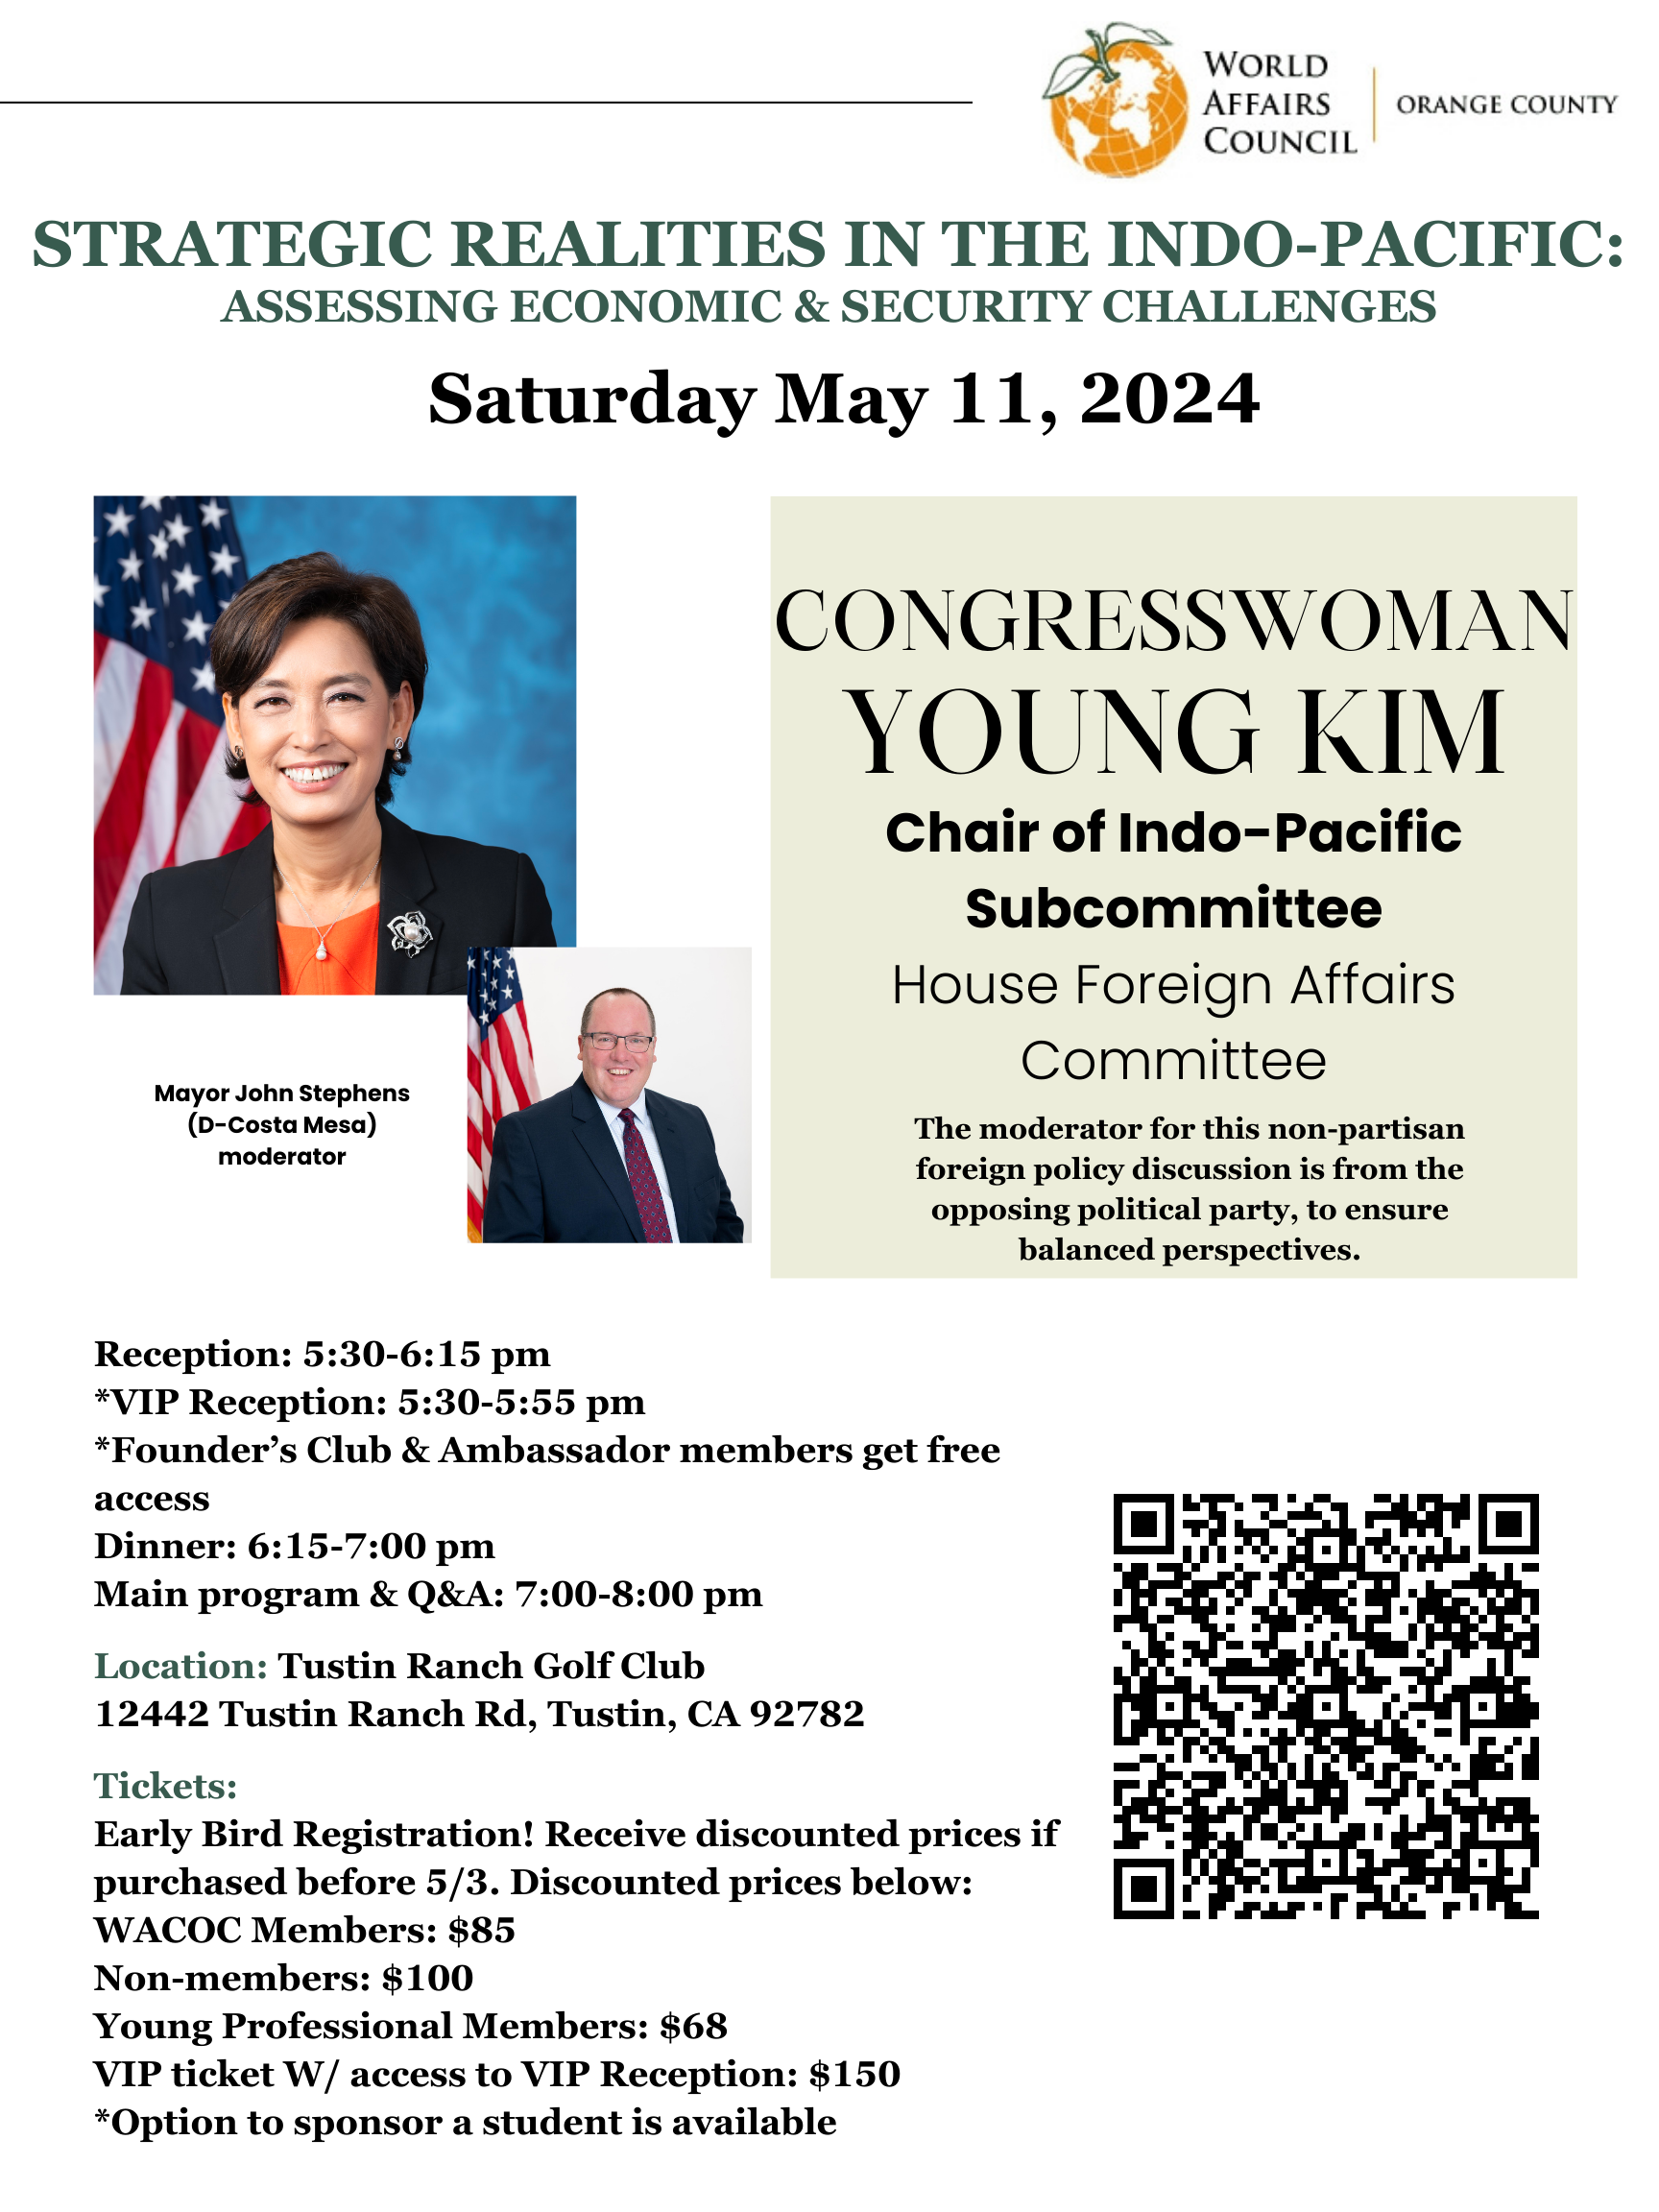 "Strategic Realities in the Indo-Pacific" with Congresswoman Young Kim